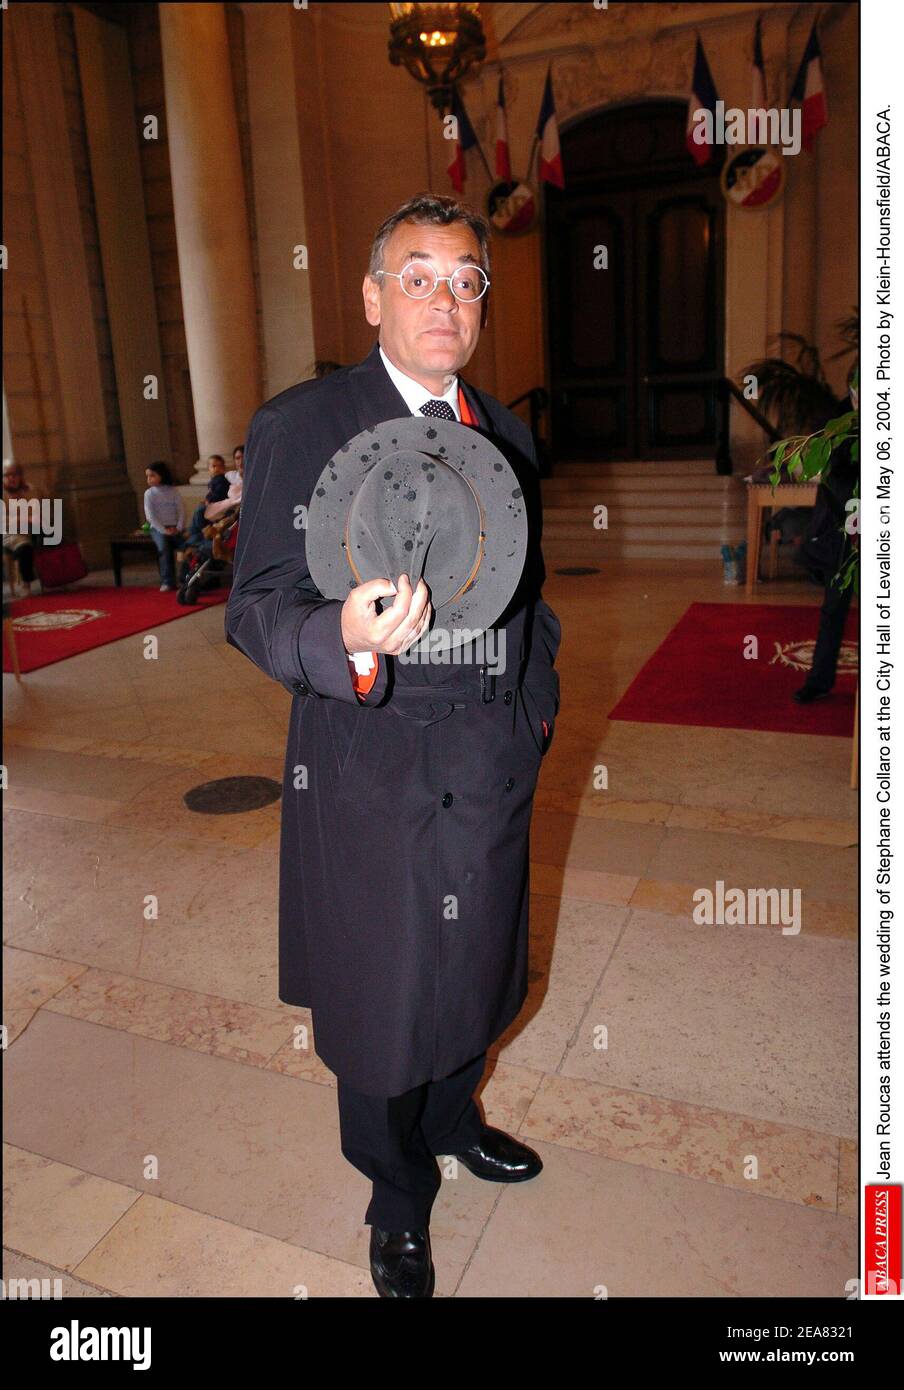 Jean Roucas attends the wedding of Stephane Collaro at the City Hall of Levallois on May 06, 2004. Photo by Klein-Hounsfield/ABACA. Stock Photo